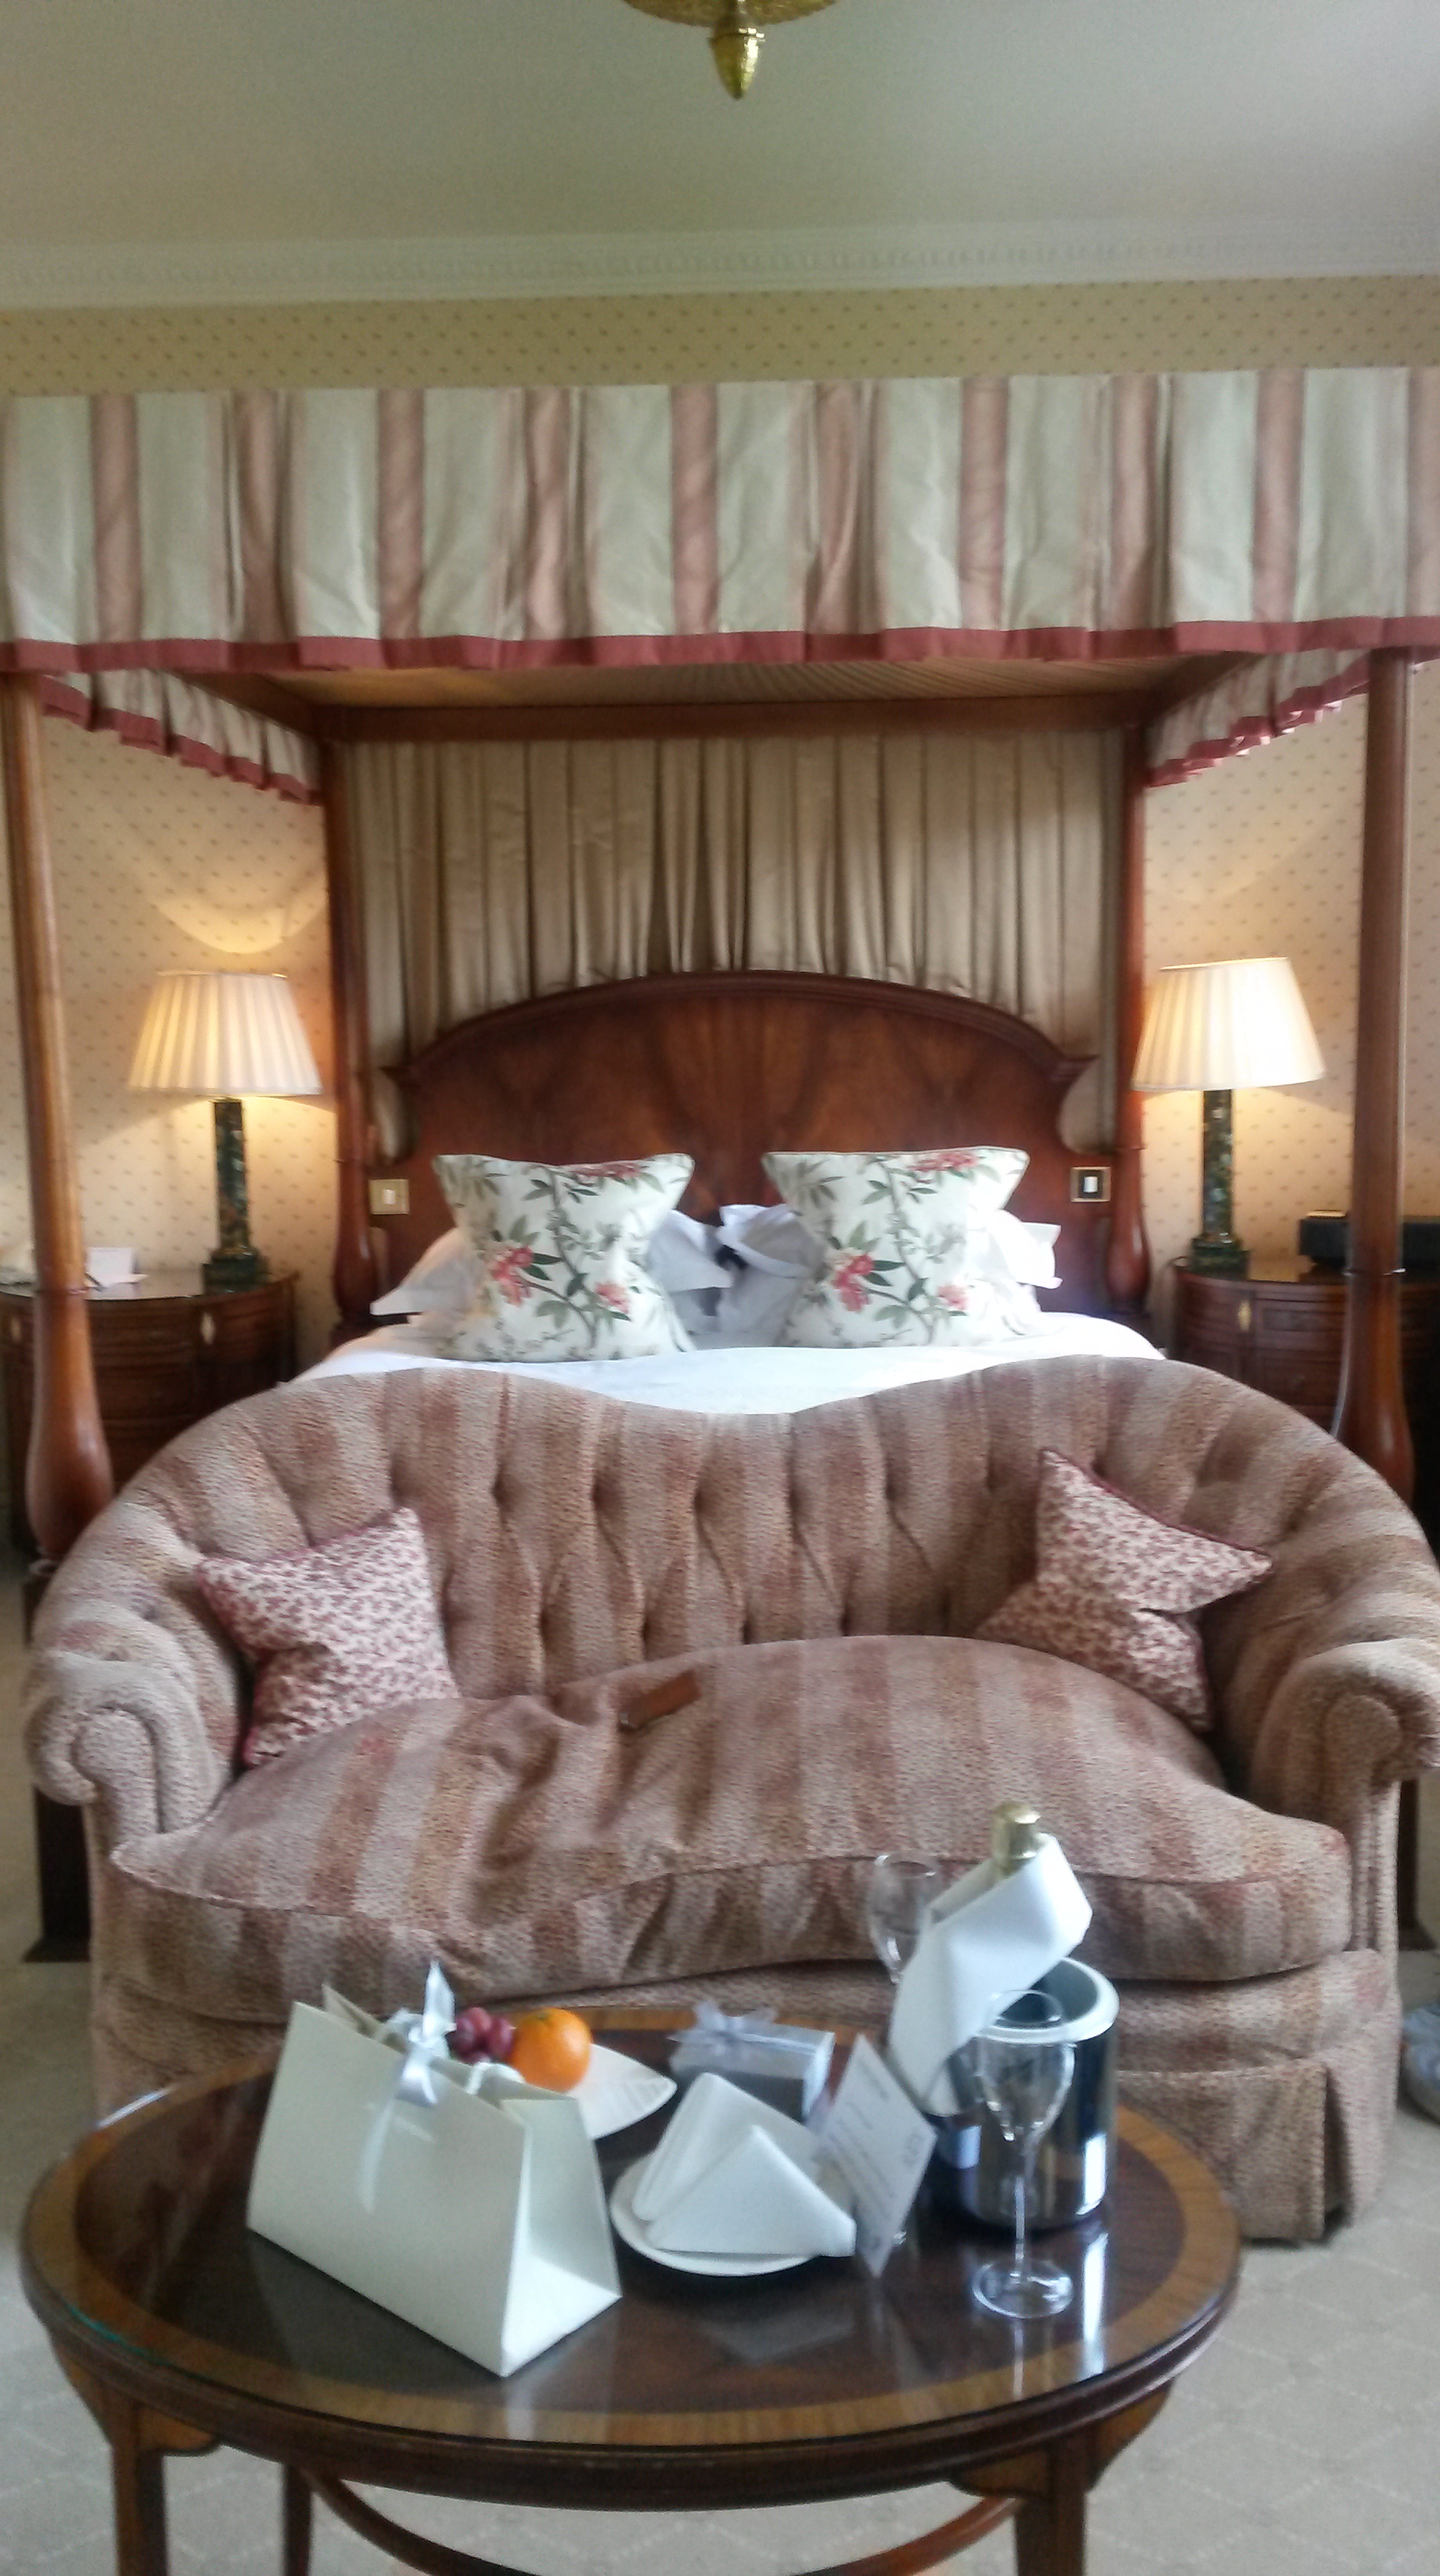 Four poster bed, oh yes!